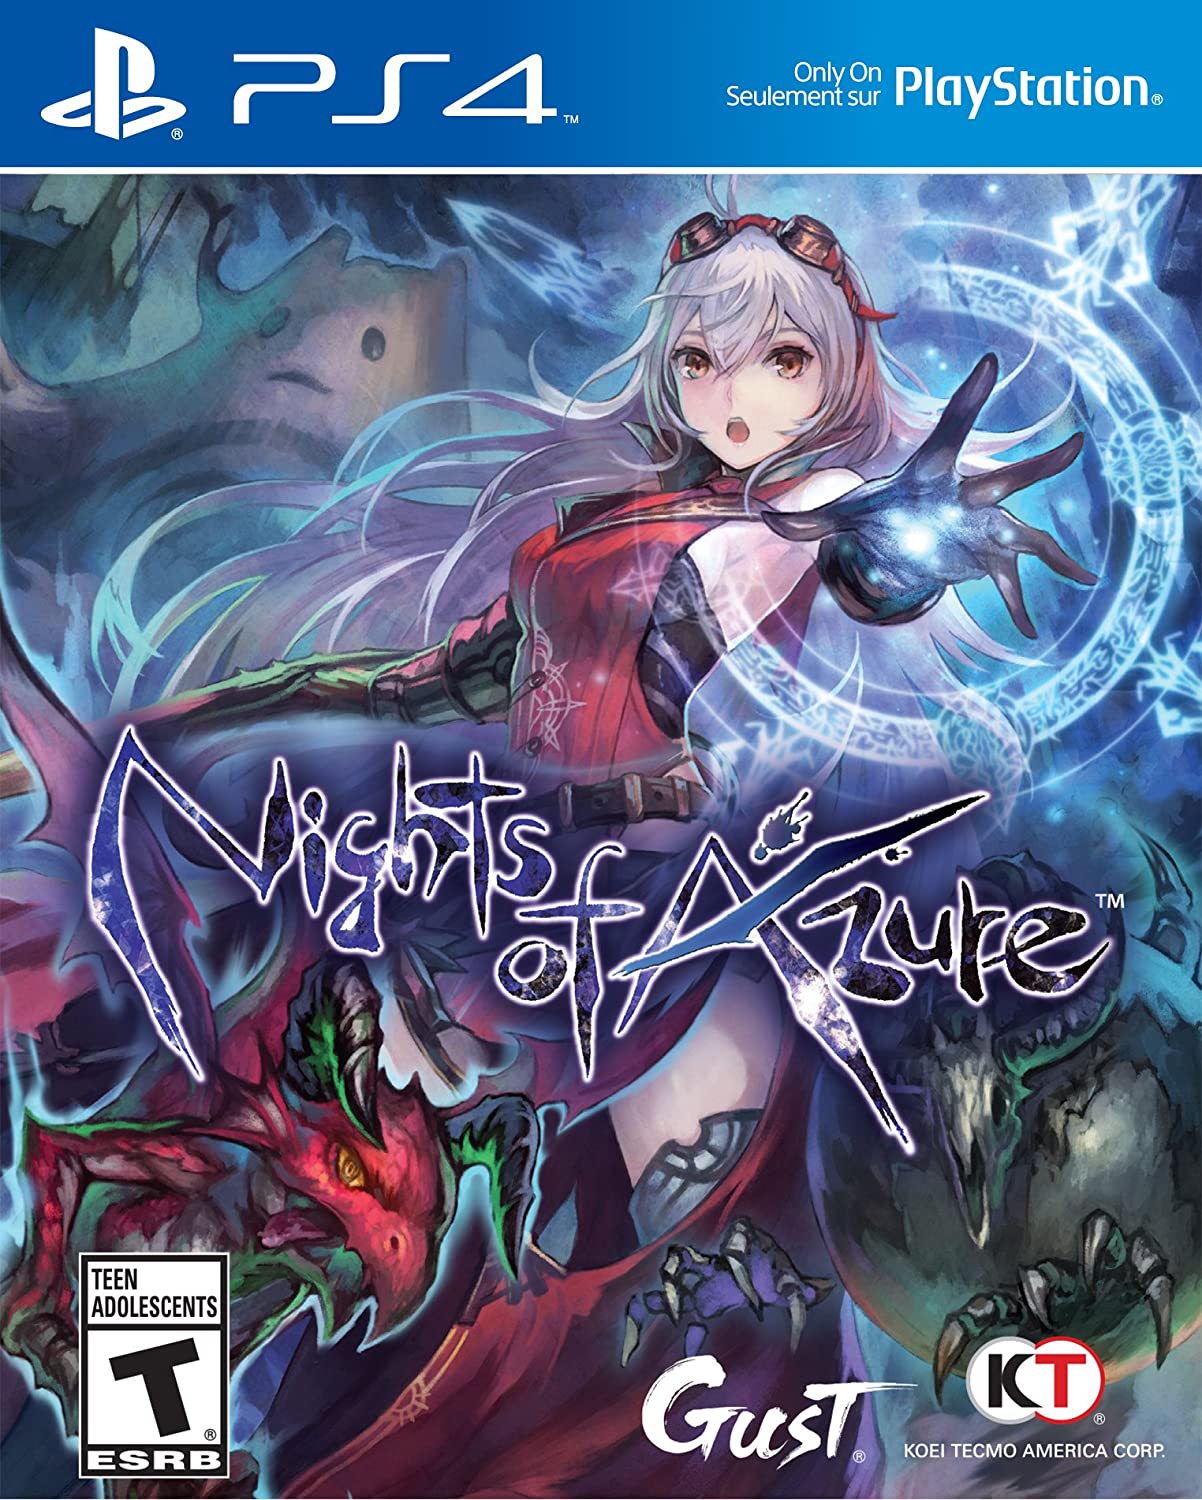 The Nights of Azure Collection